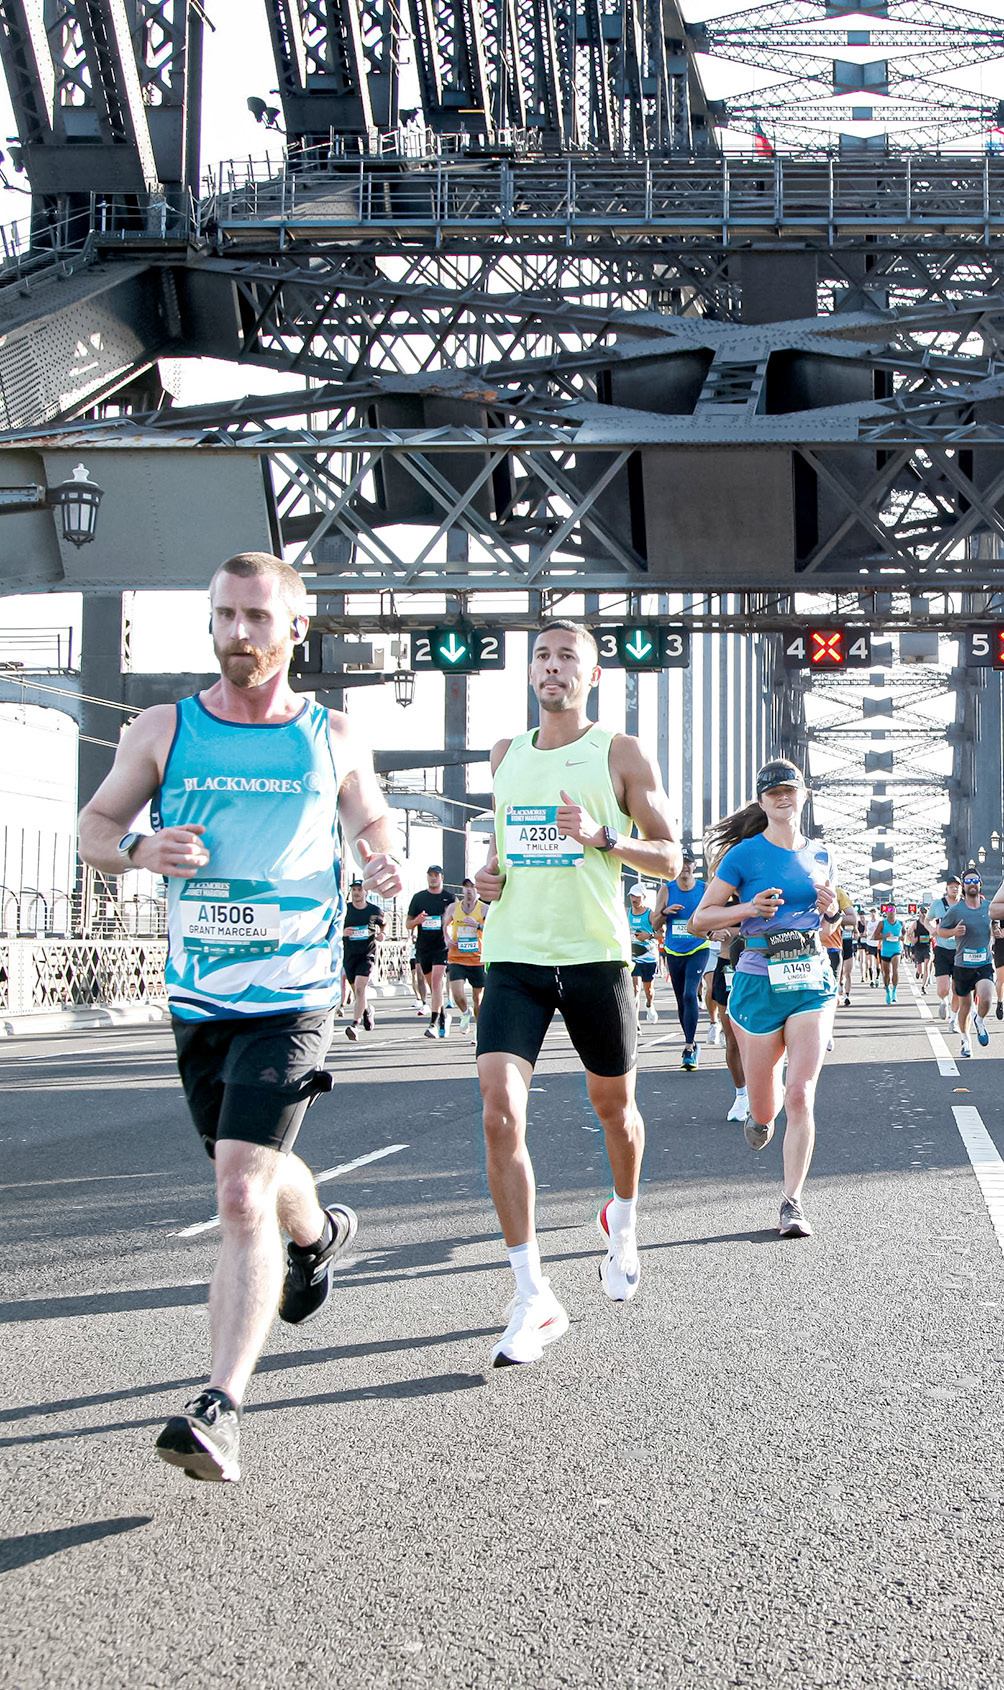 TRENTON MILLER (middle), along with the other Sydney Marathon runners, ran across the world’s largest steel arch bridge, the Sydney Harbour Bridge, during the endurance run in Sydney on September 18. Miller, who was in Australia on business, not only participated in the marathon, but qualified himself for the Boston Marathon by running a time of 2:58:42. Miller finished 108th in the pack of 3,450 runners from all around the world. (Photo Courtesy of USA Basketball)